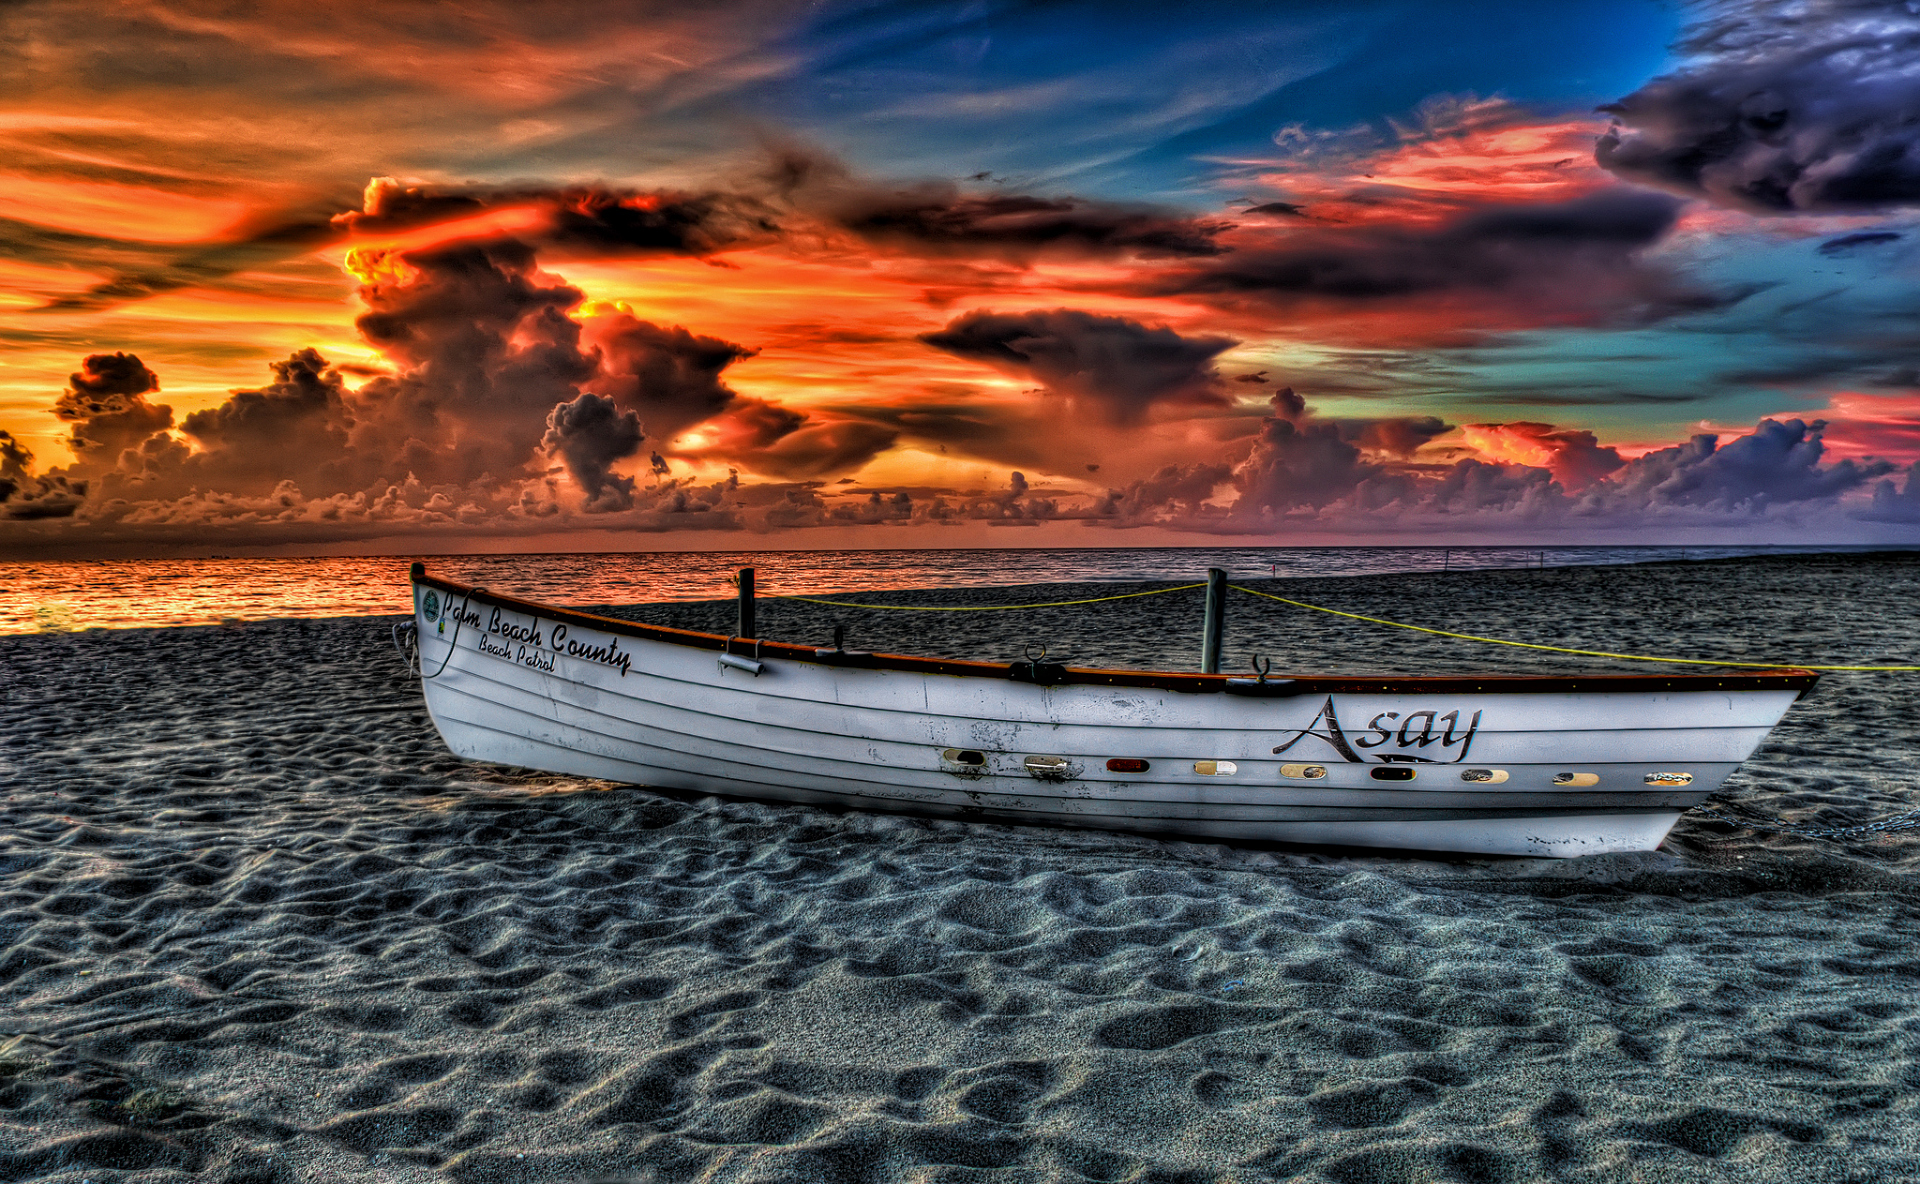 hdr photo software free download